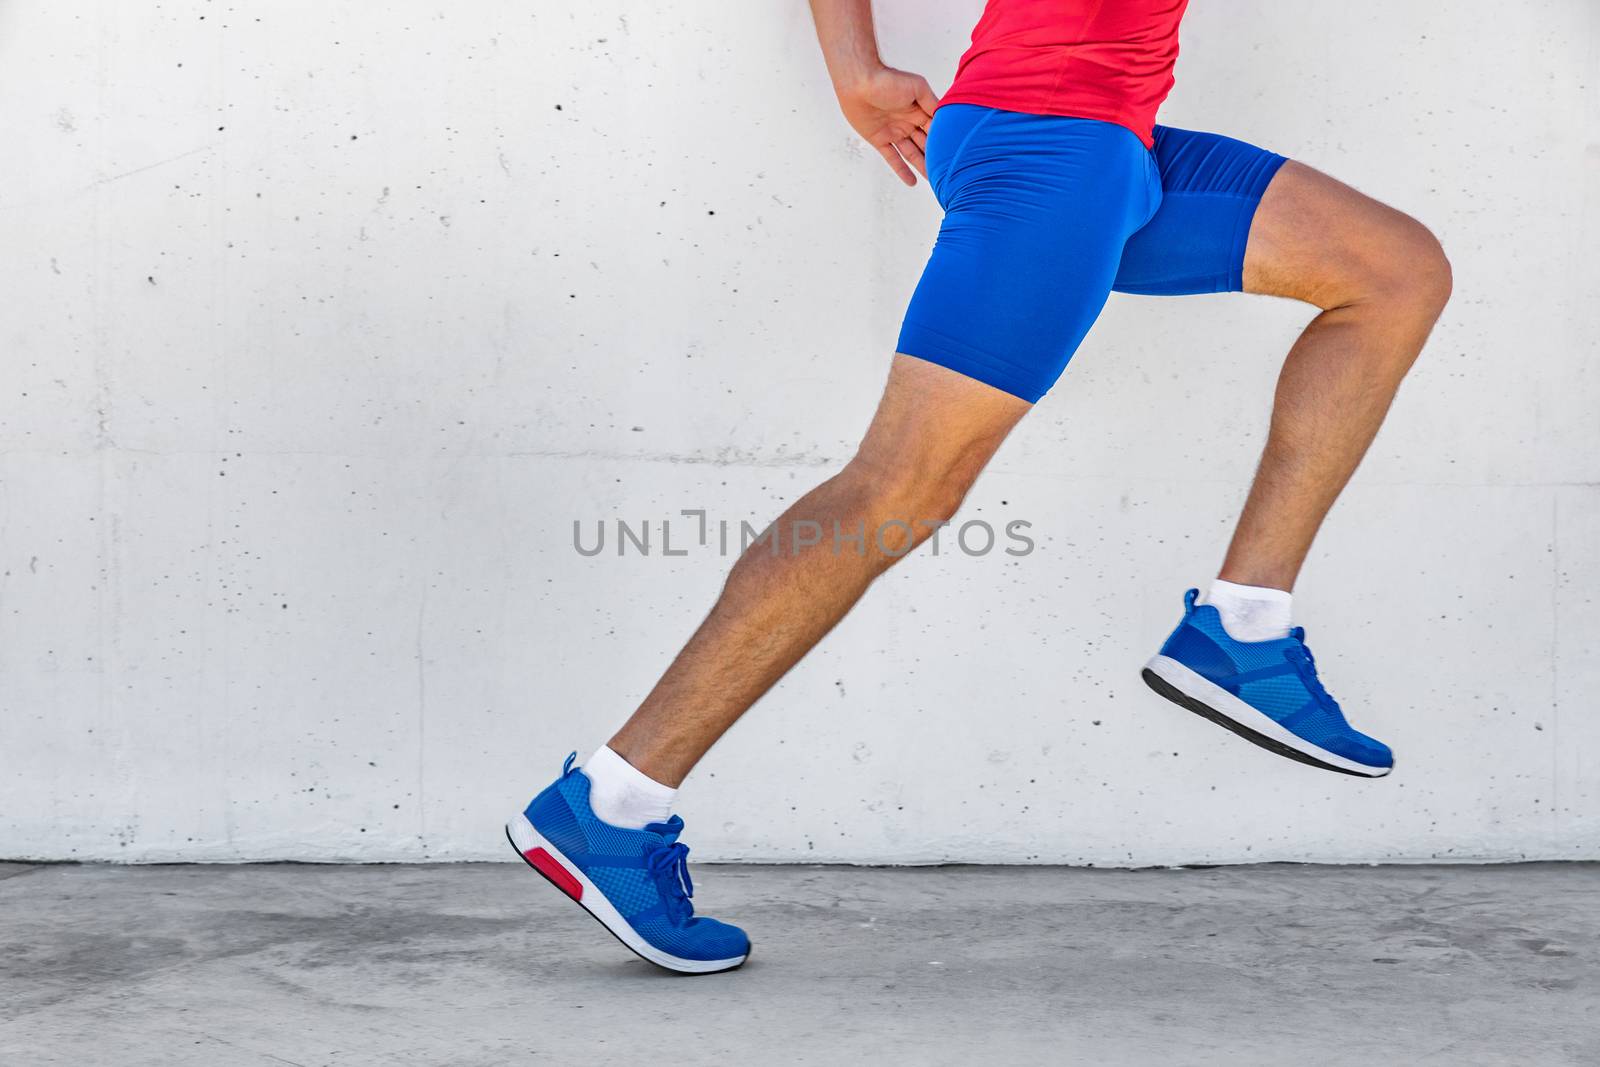 Fitness athlete man running on asphalt sidewalk in city street. Sport lifestyle. Closeup of lower body runner's legs on workout marathon run against white wall background. Shoes, compression clothing.